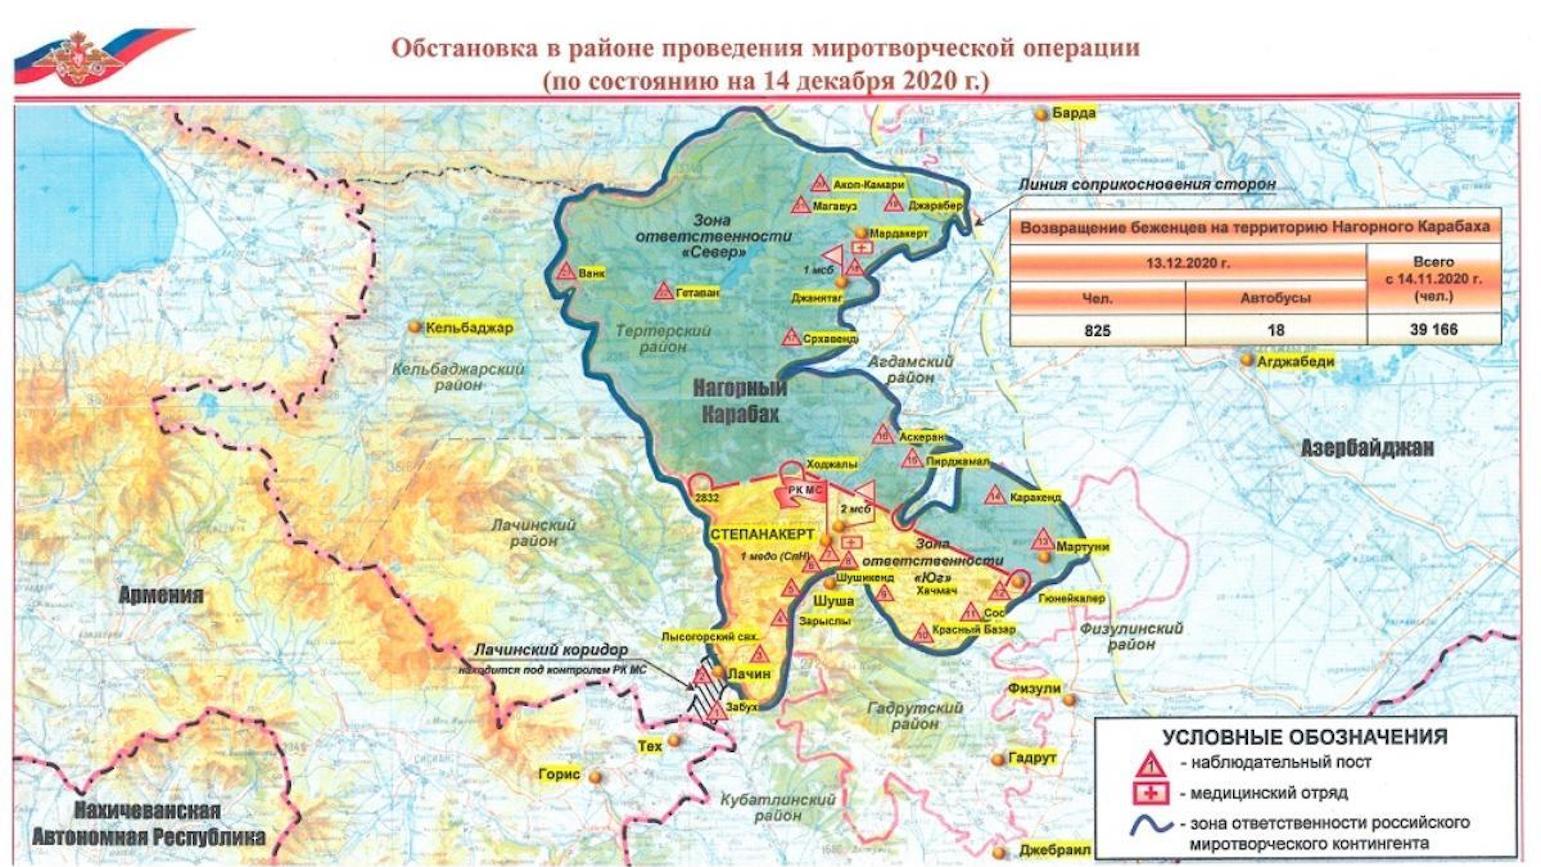 Russian Peacekeepers Enter the Tense Southern Region of Karabakh